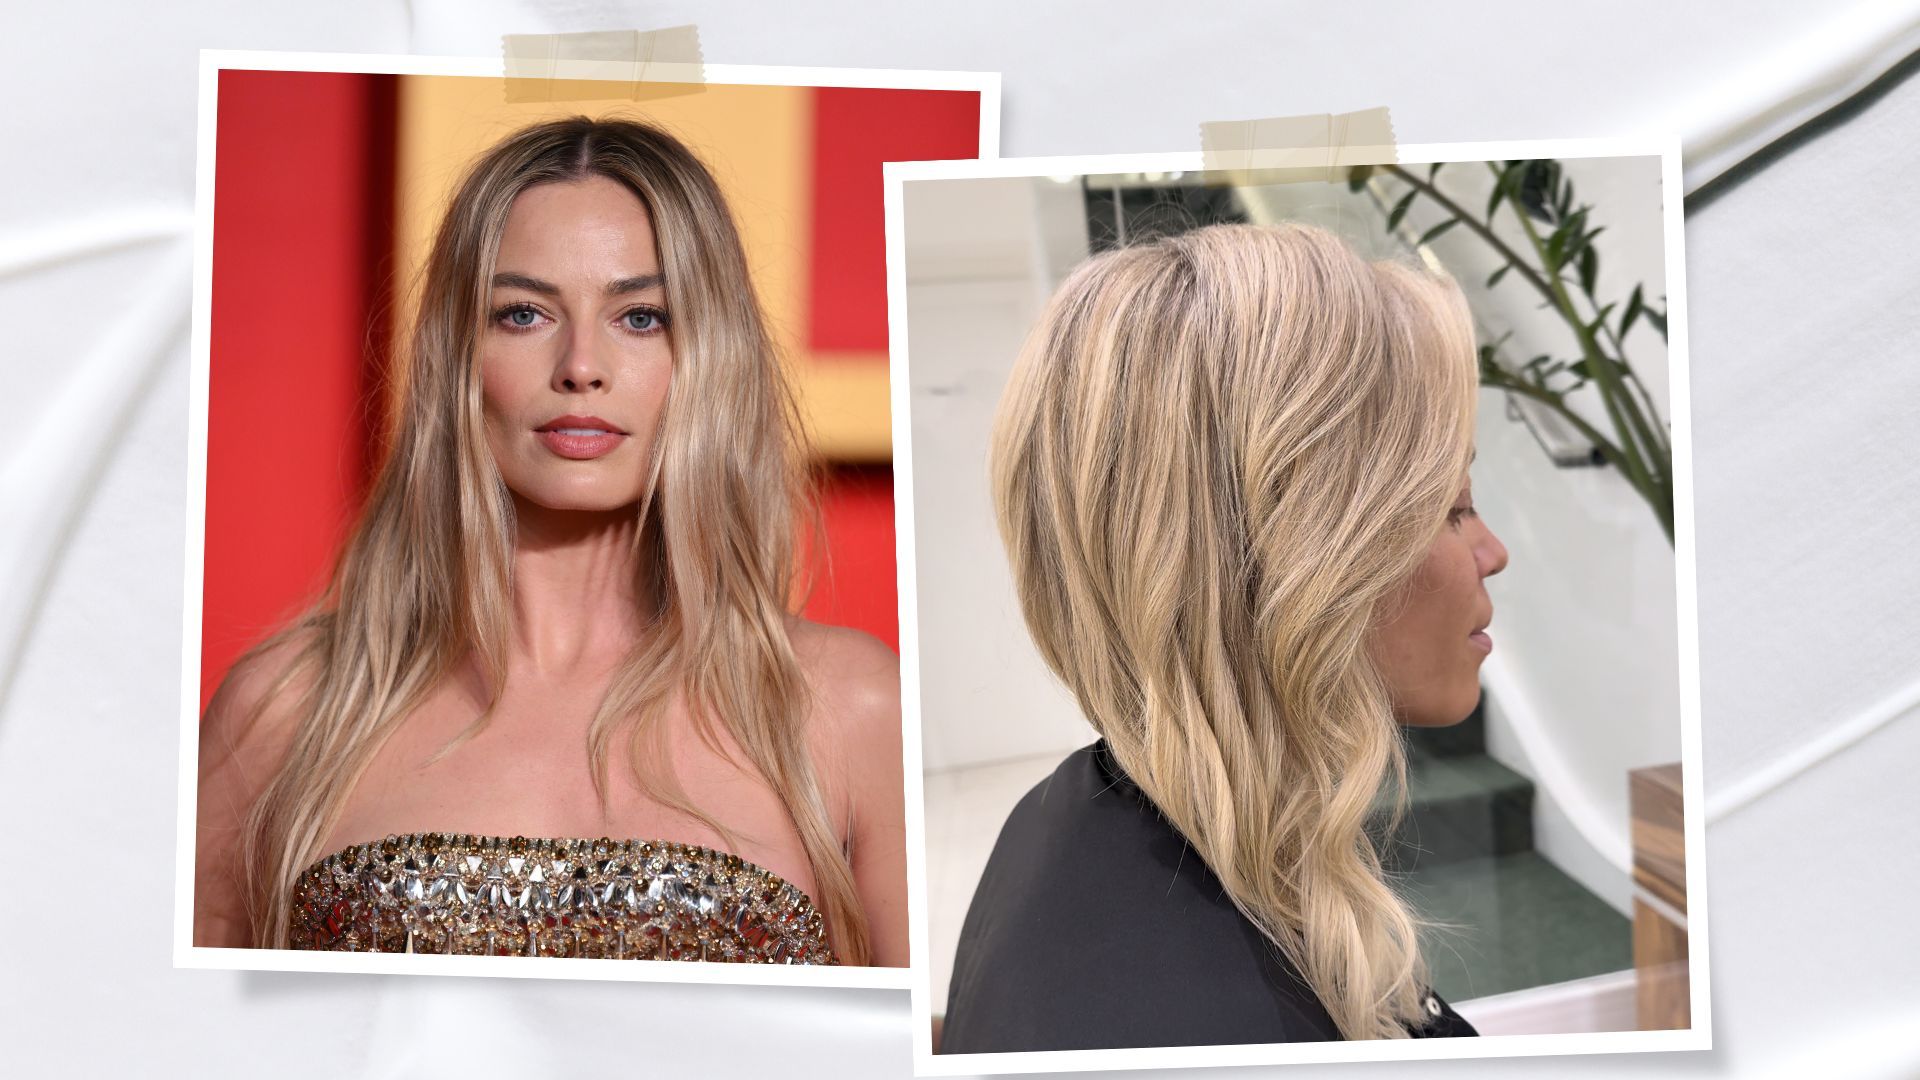 I dyed my hair 'Old Money Blonde' like Margot Robbie - here's what a stylist needs you to know